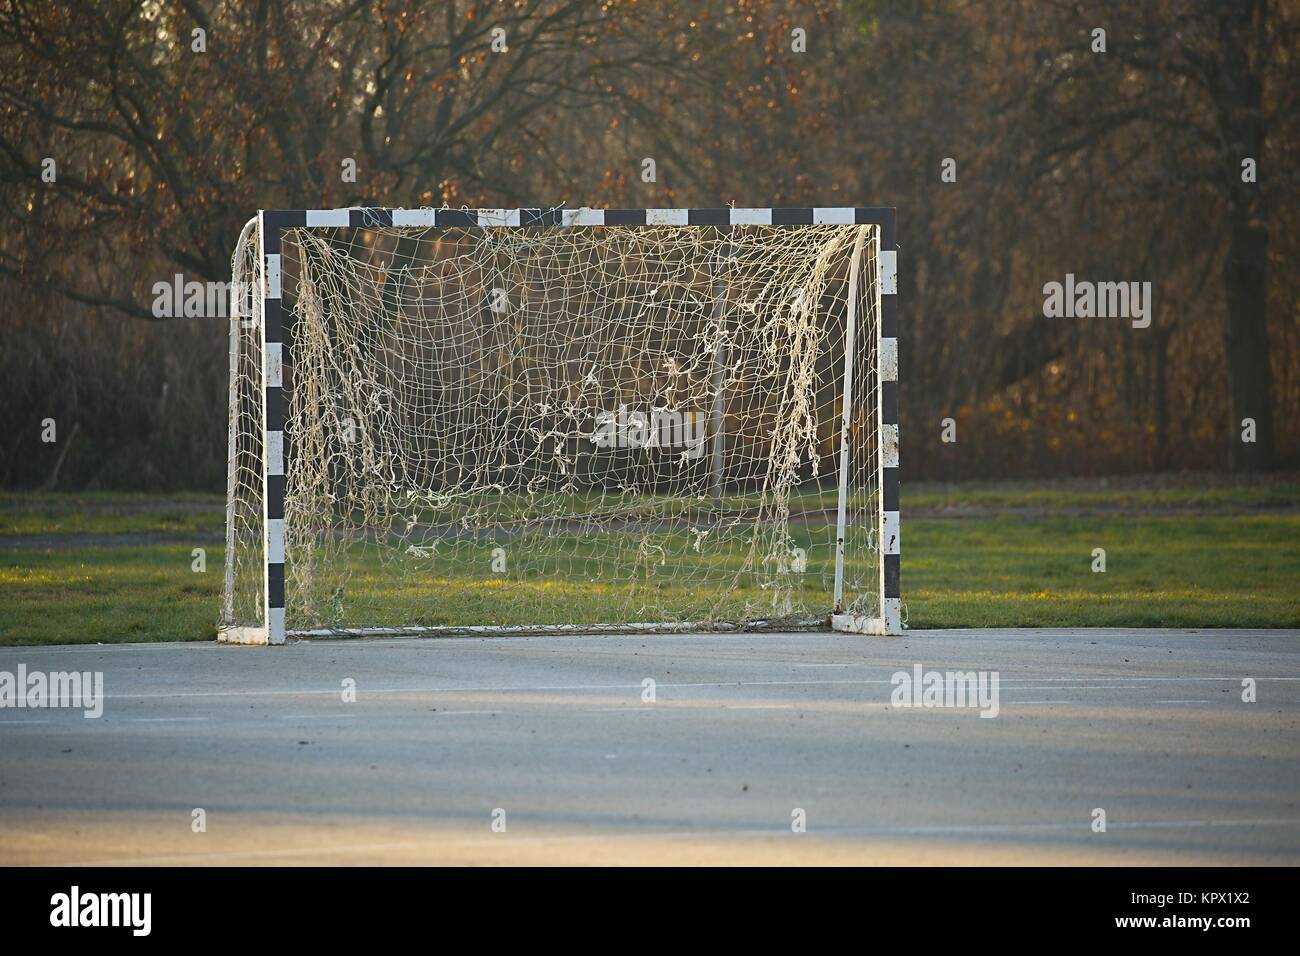 Football Gate in a Park Stock Photo